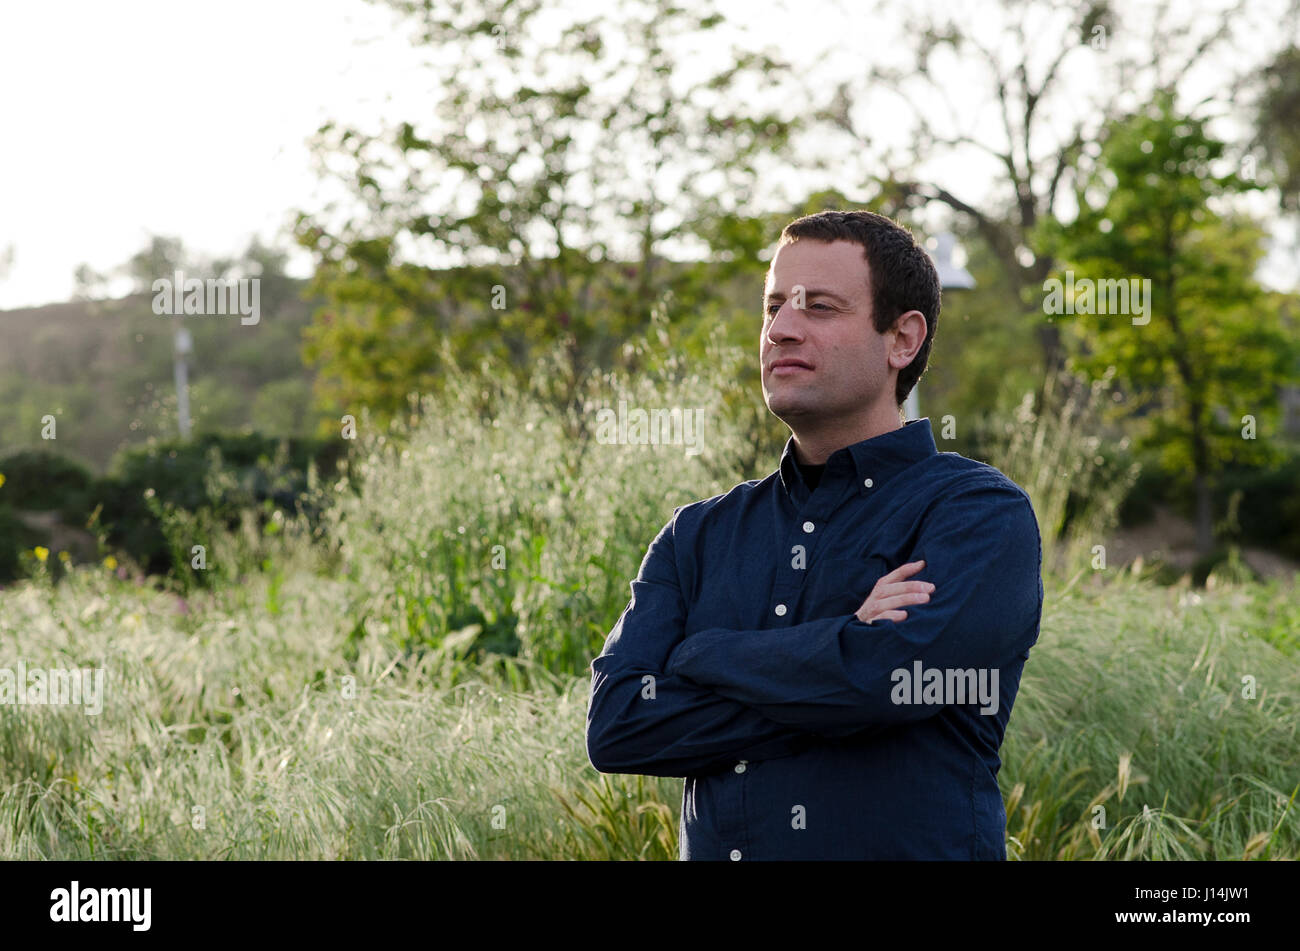 Man looking forward to the future in a grassy field with arms crossed. Stock Photo